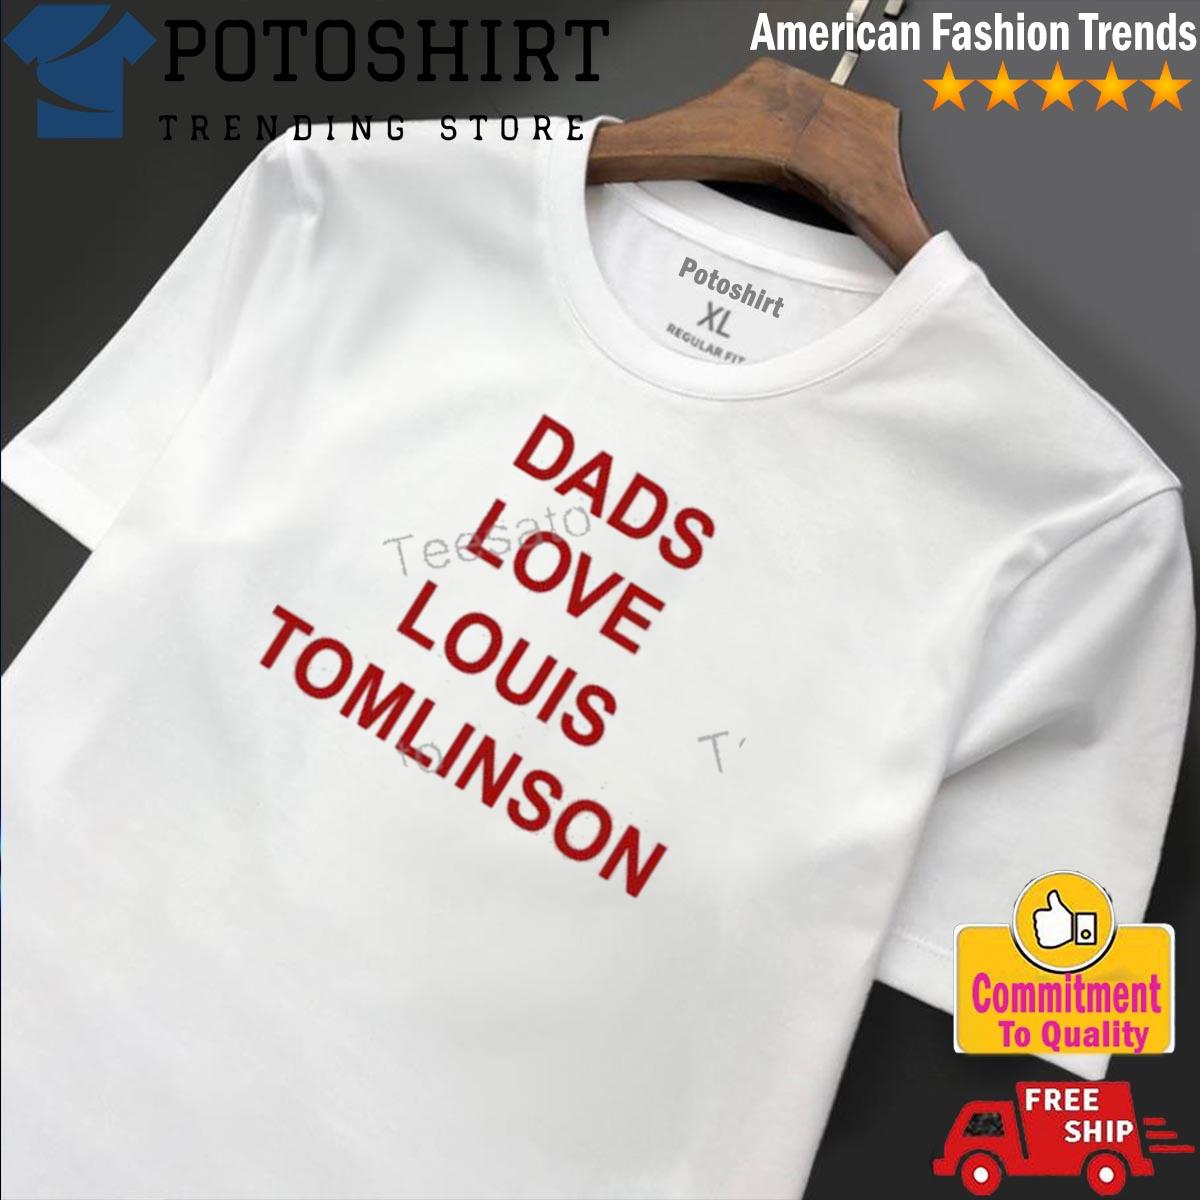 Cool Dads Love Louis Tomlinson Shirt, hoodie, sweater and long sleeve